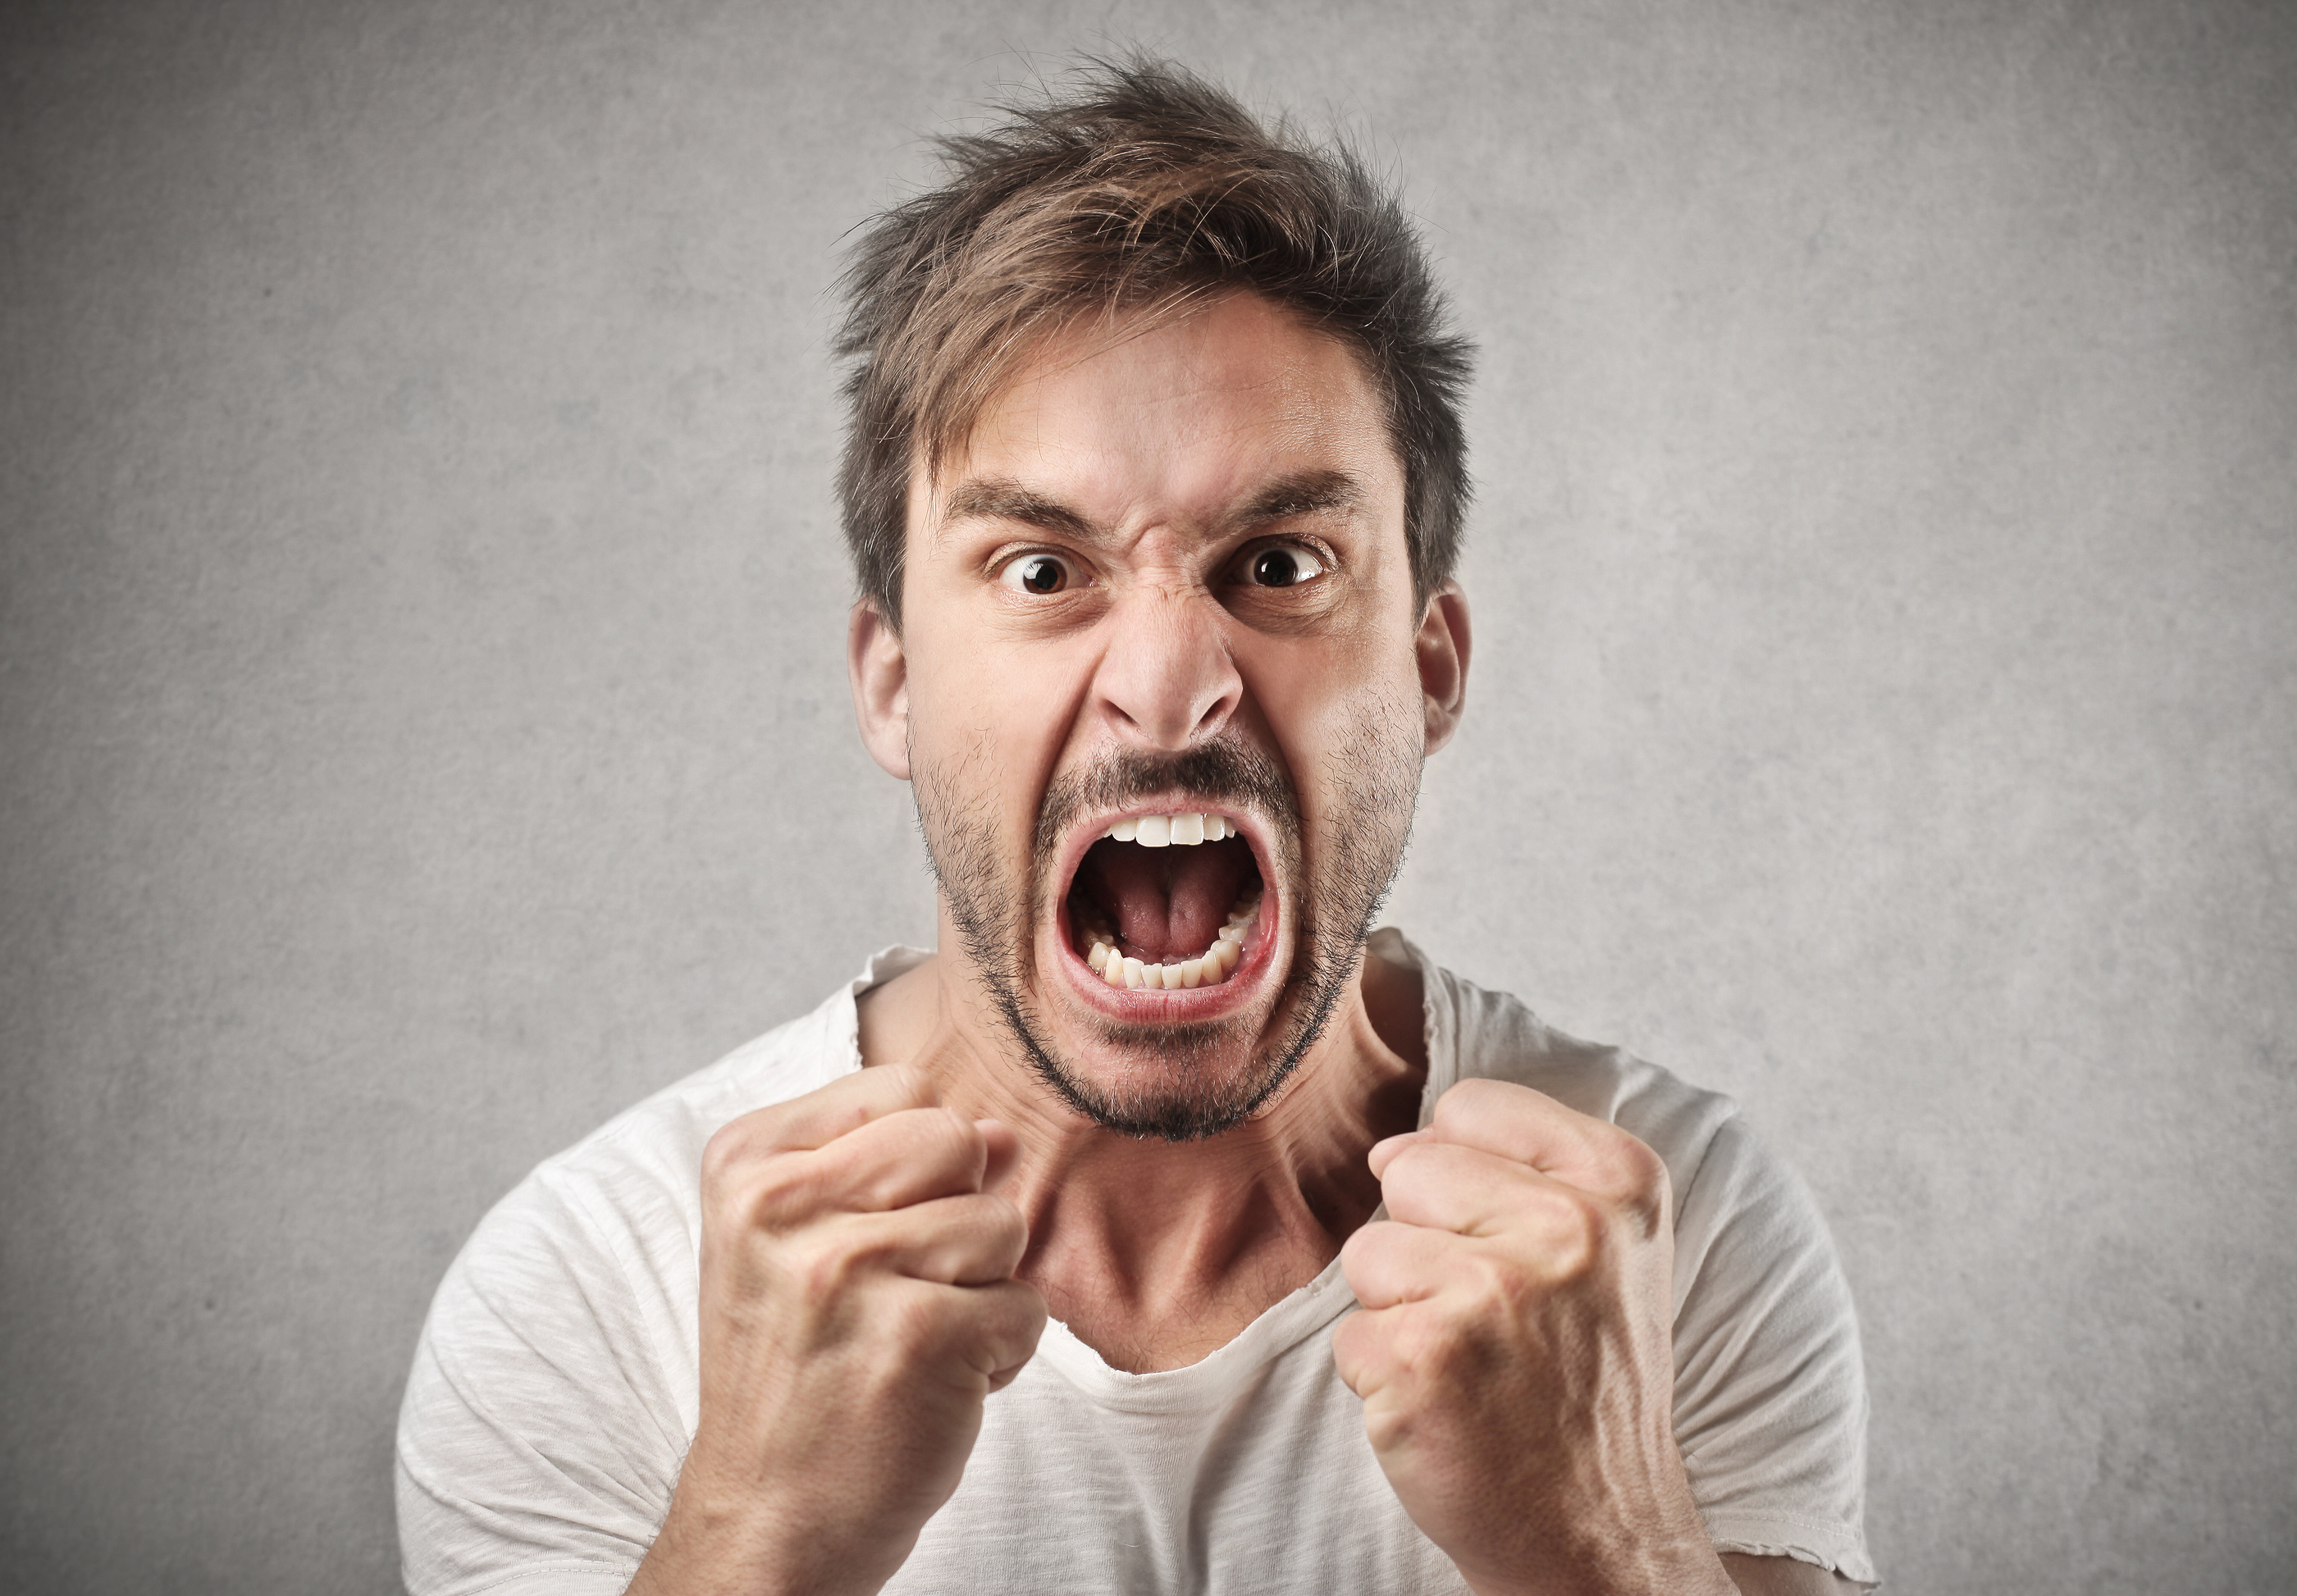 [Imagen: bigstock-portrait-of-young-angry-man-52068682.jpg]